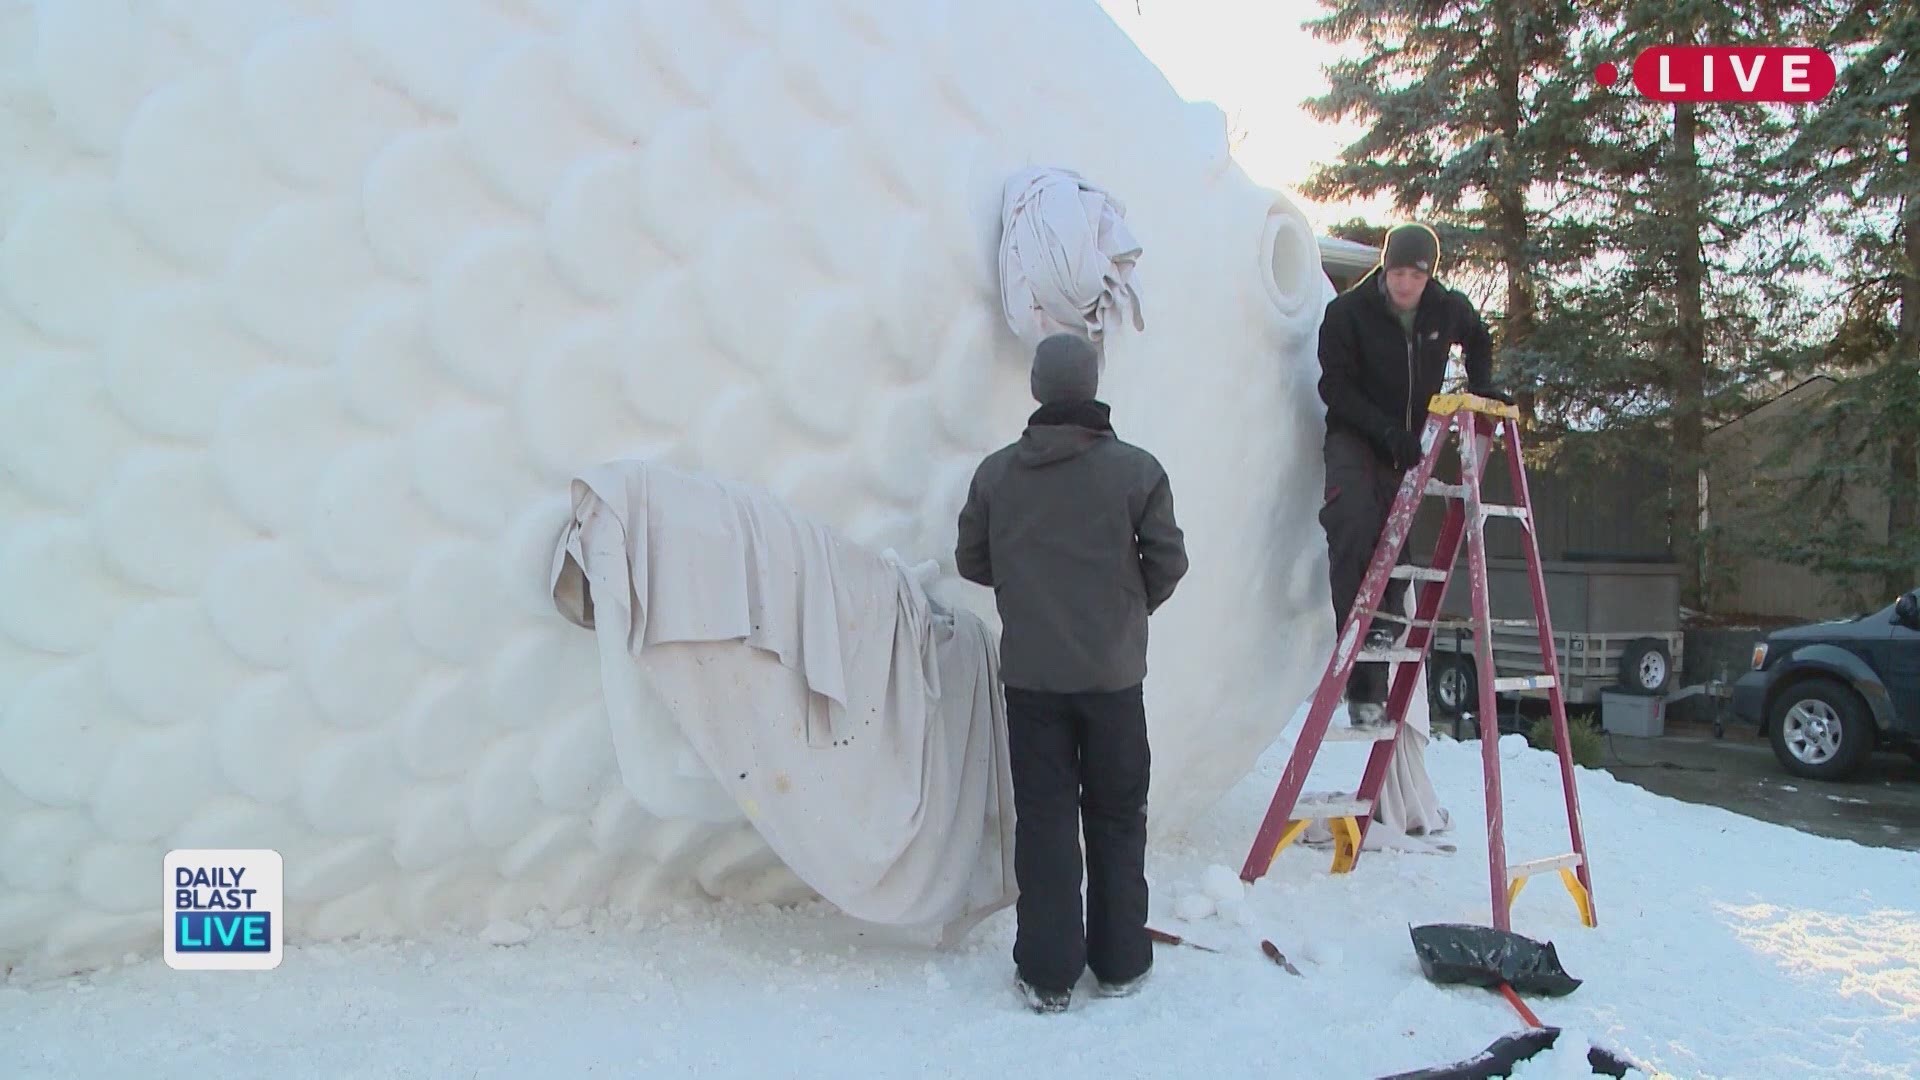 Brothers Austin, Trevor  and Connor Bartz have managed to turn a snowstorm mess into a magical masterpiece. They created monster-sized sculptures out of the snow in their parents' front yard. 
The sculptures are packed by hand and no details are spared i